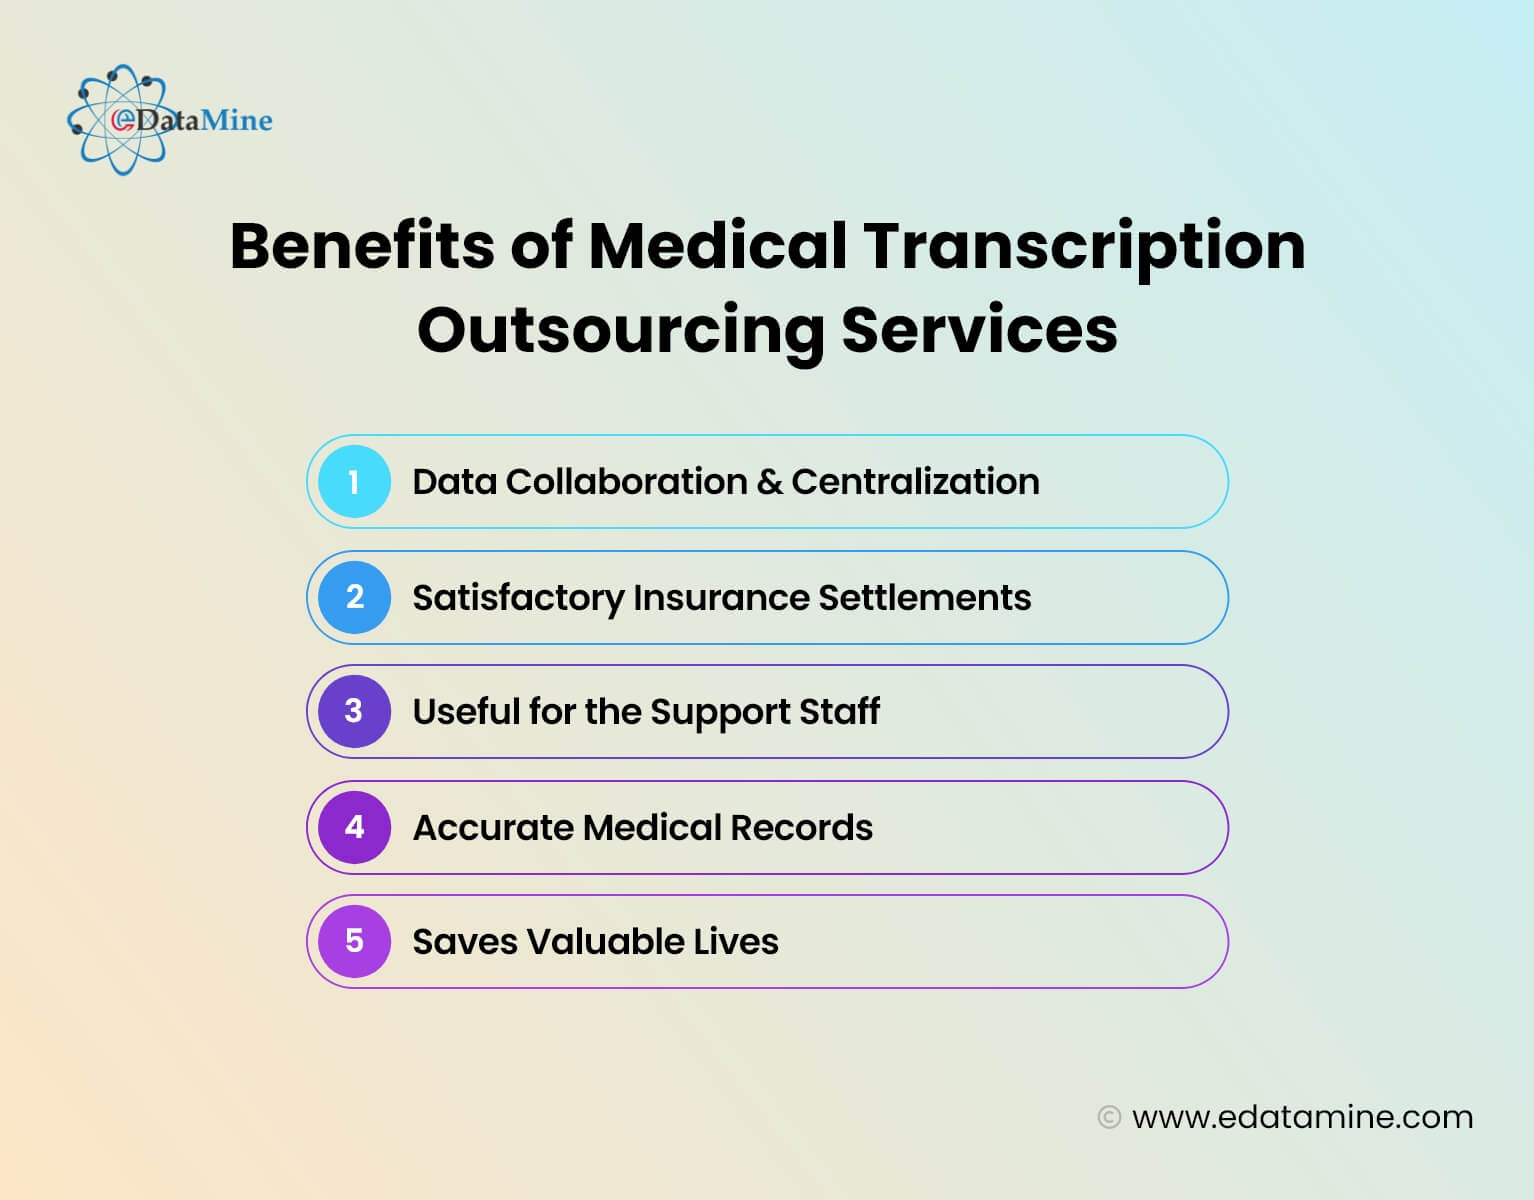 Benefits of Medical Transcription Outsourcing Services